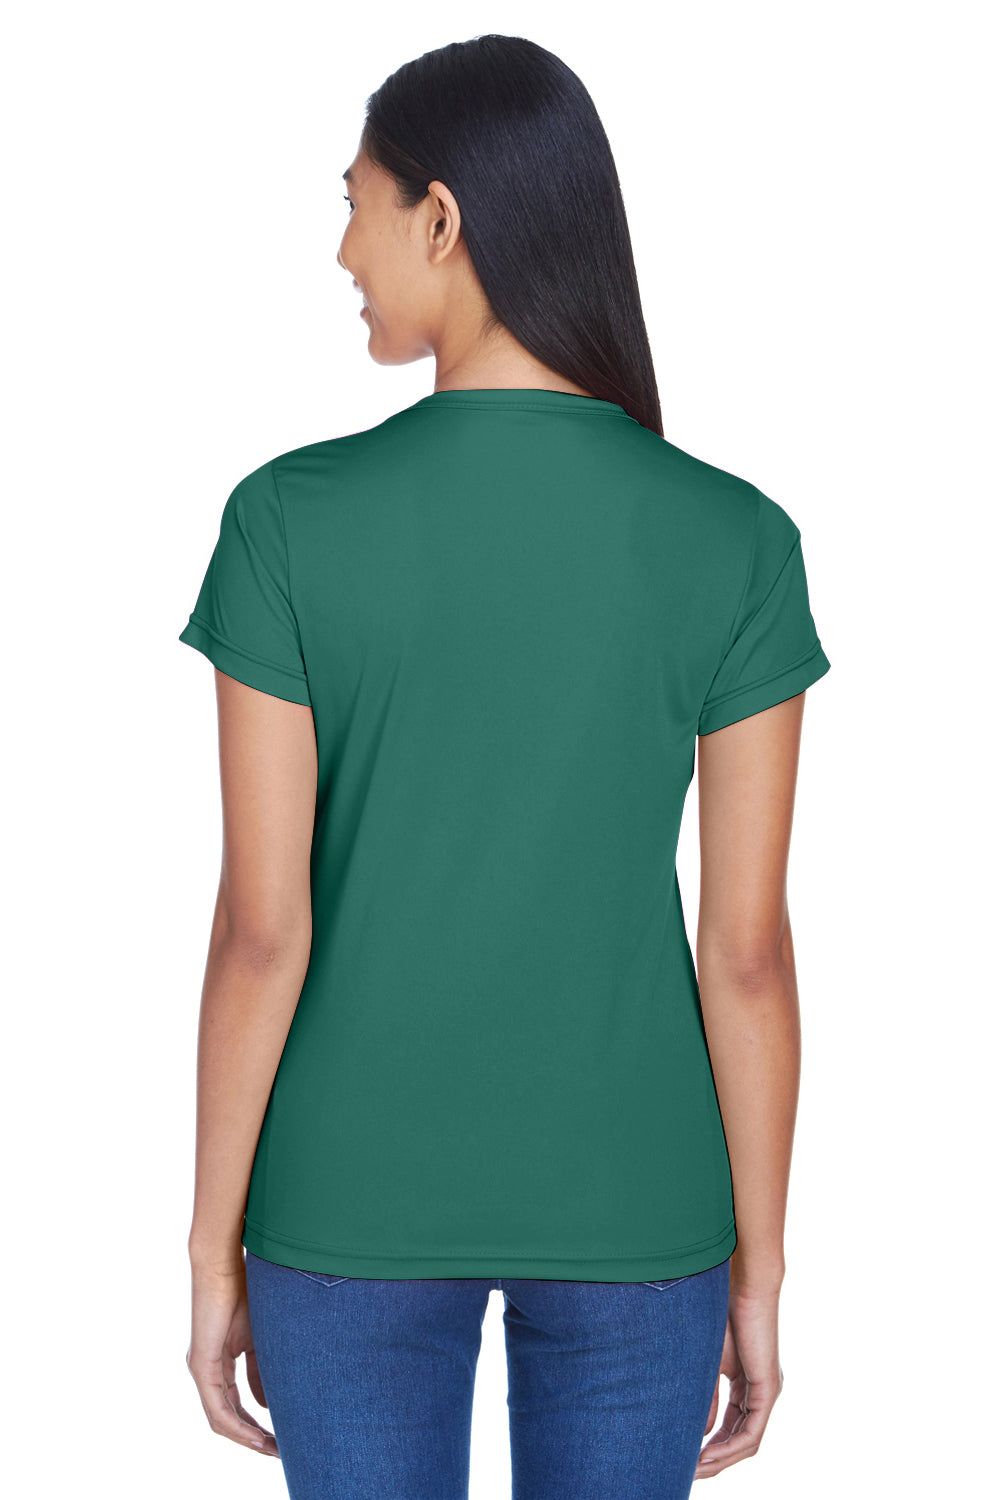 UltraClub 8420L Womens Cool & Dry Performance Moisture Wicking Short Sleeve Crewneck T-Shirt Forest Green Back